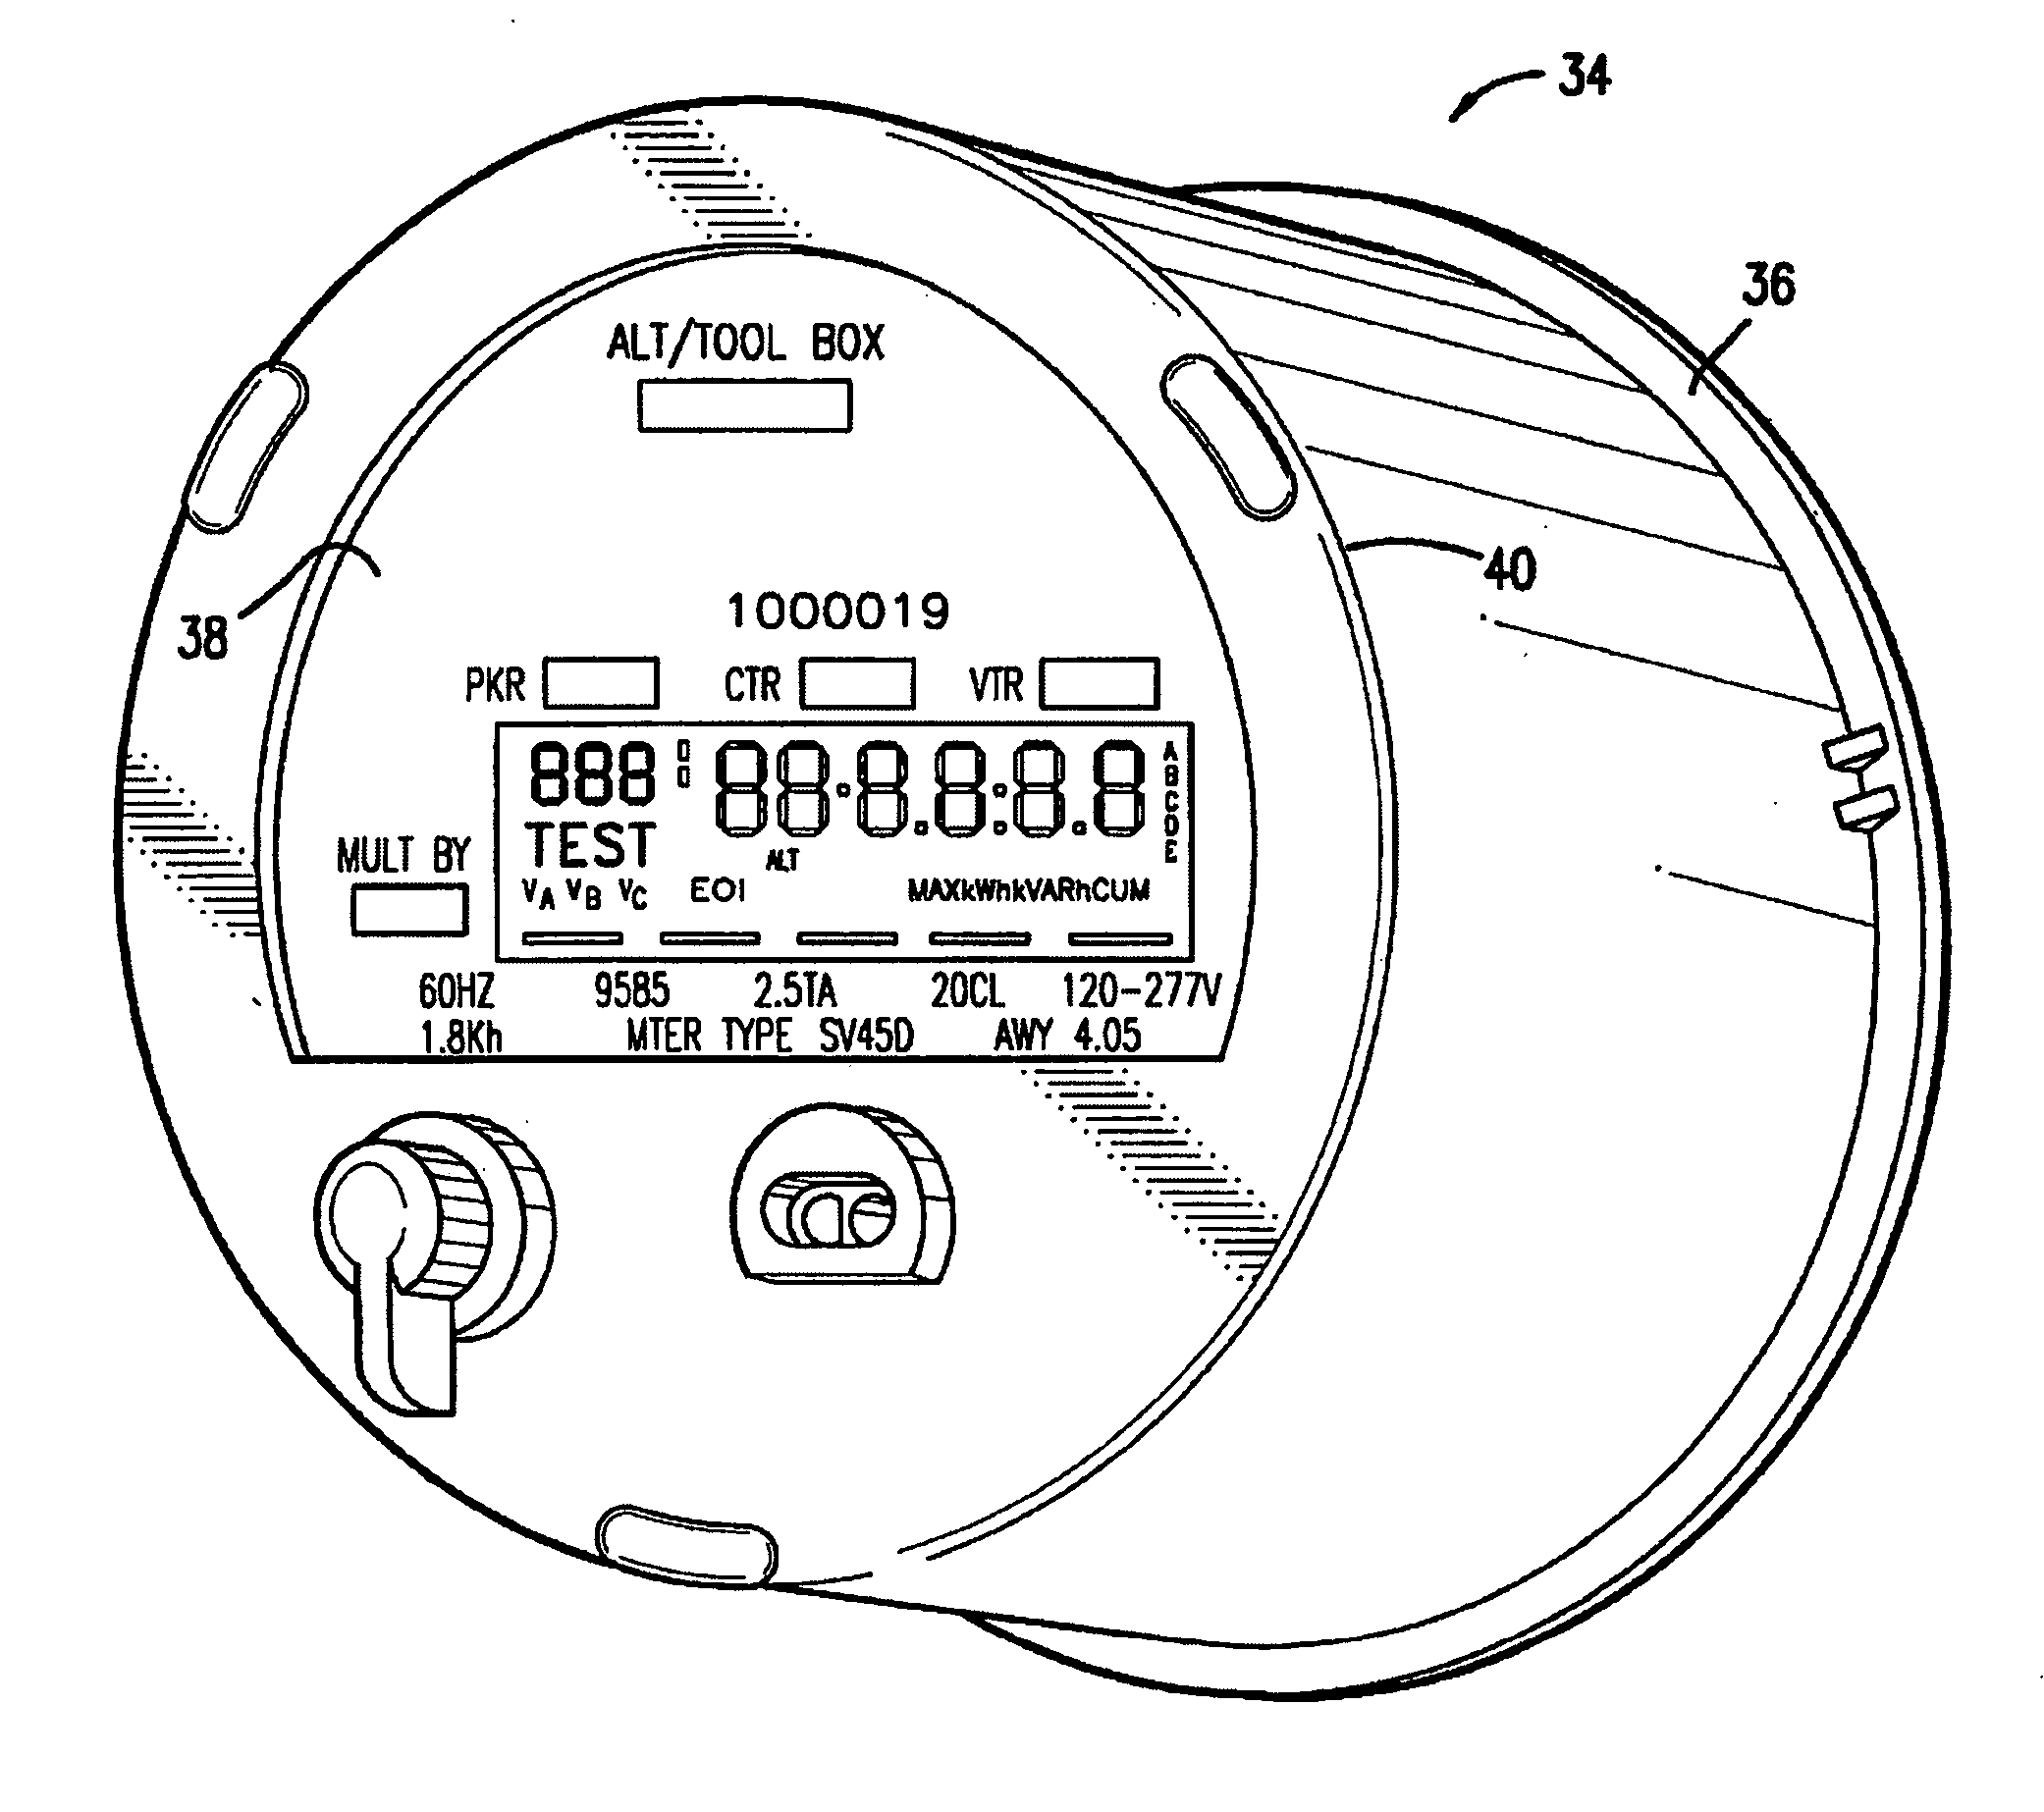 Electronic revenue meter with automatic service sensing